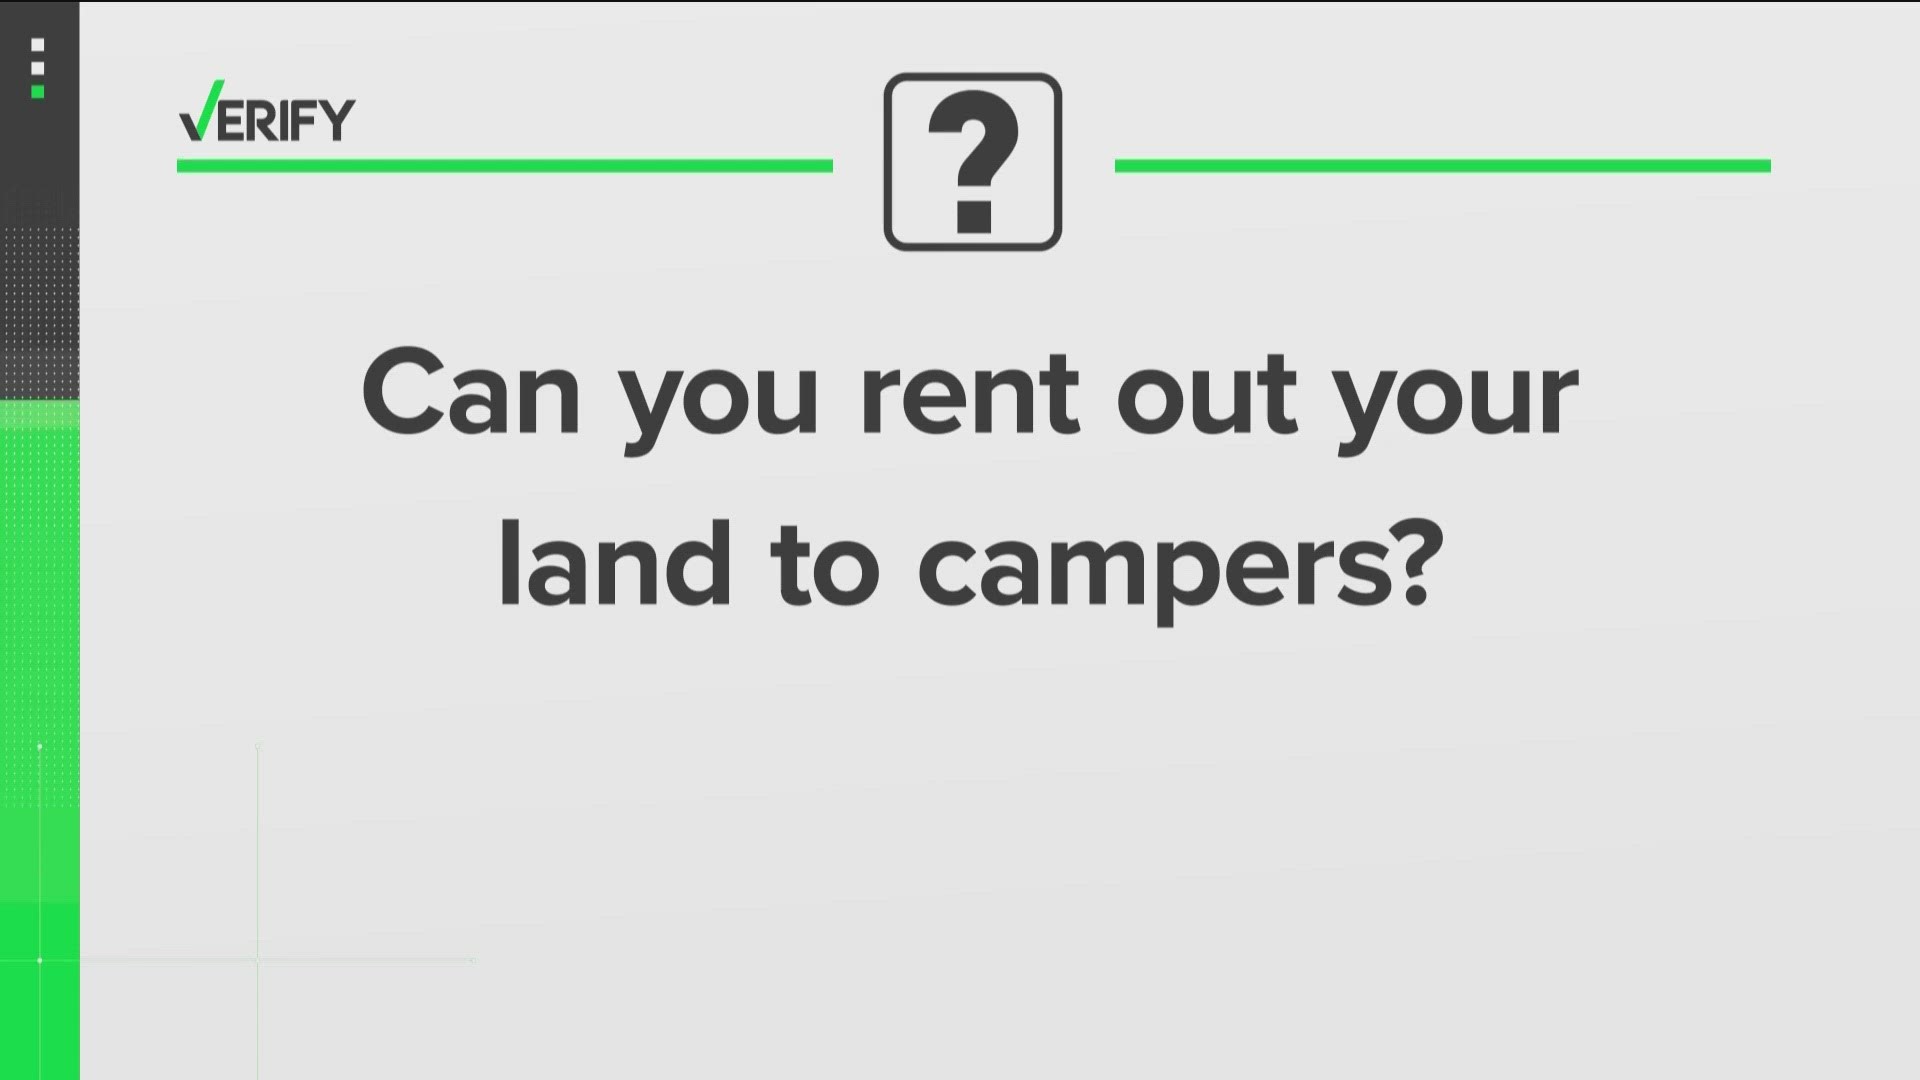 Here's what the health department says you would have to do before you can rent out your space for camping in the state of Ohio.